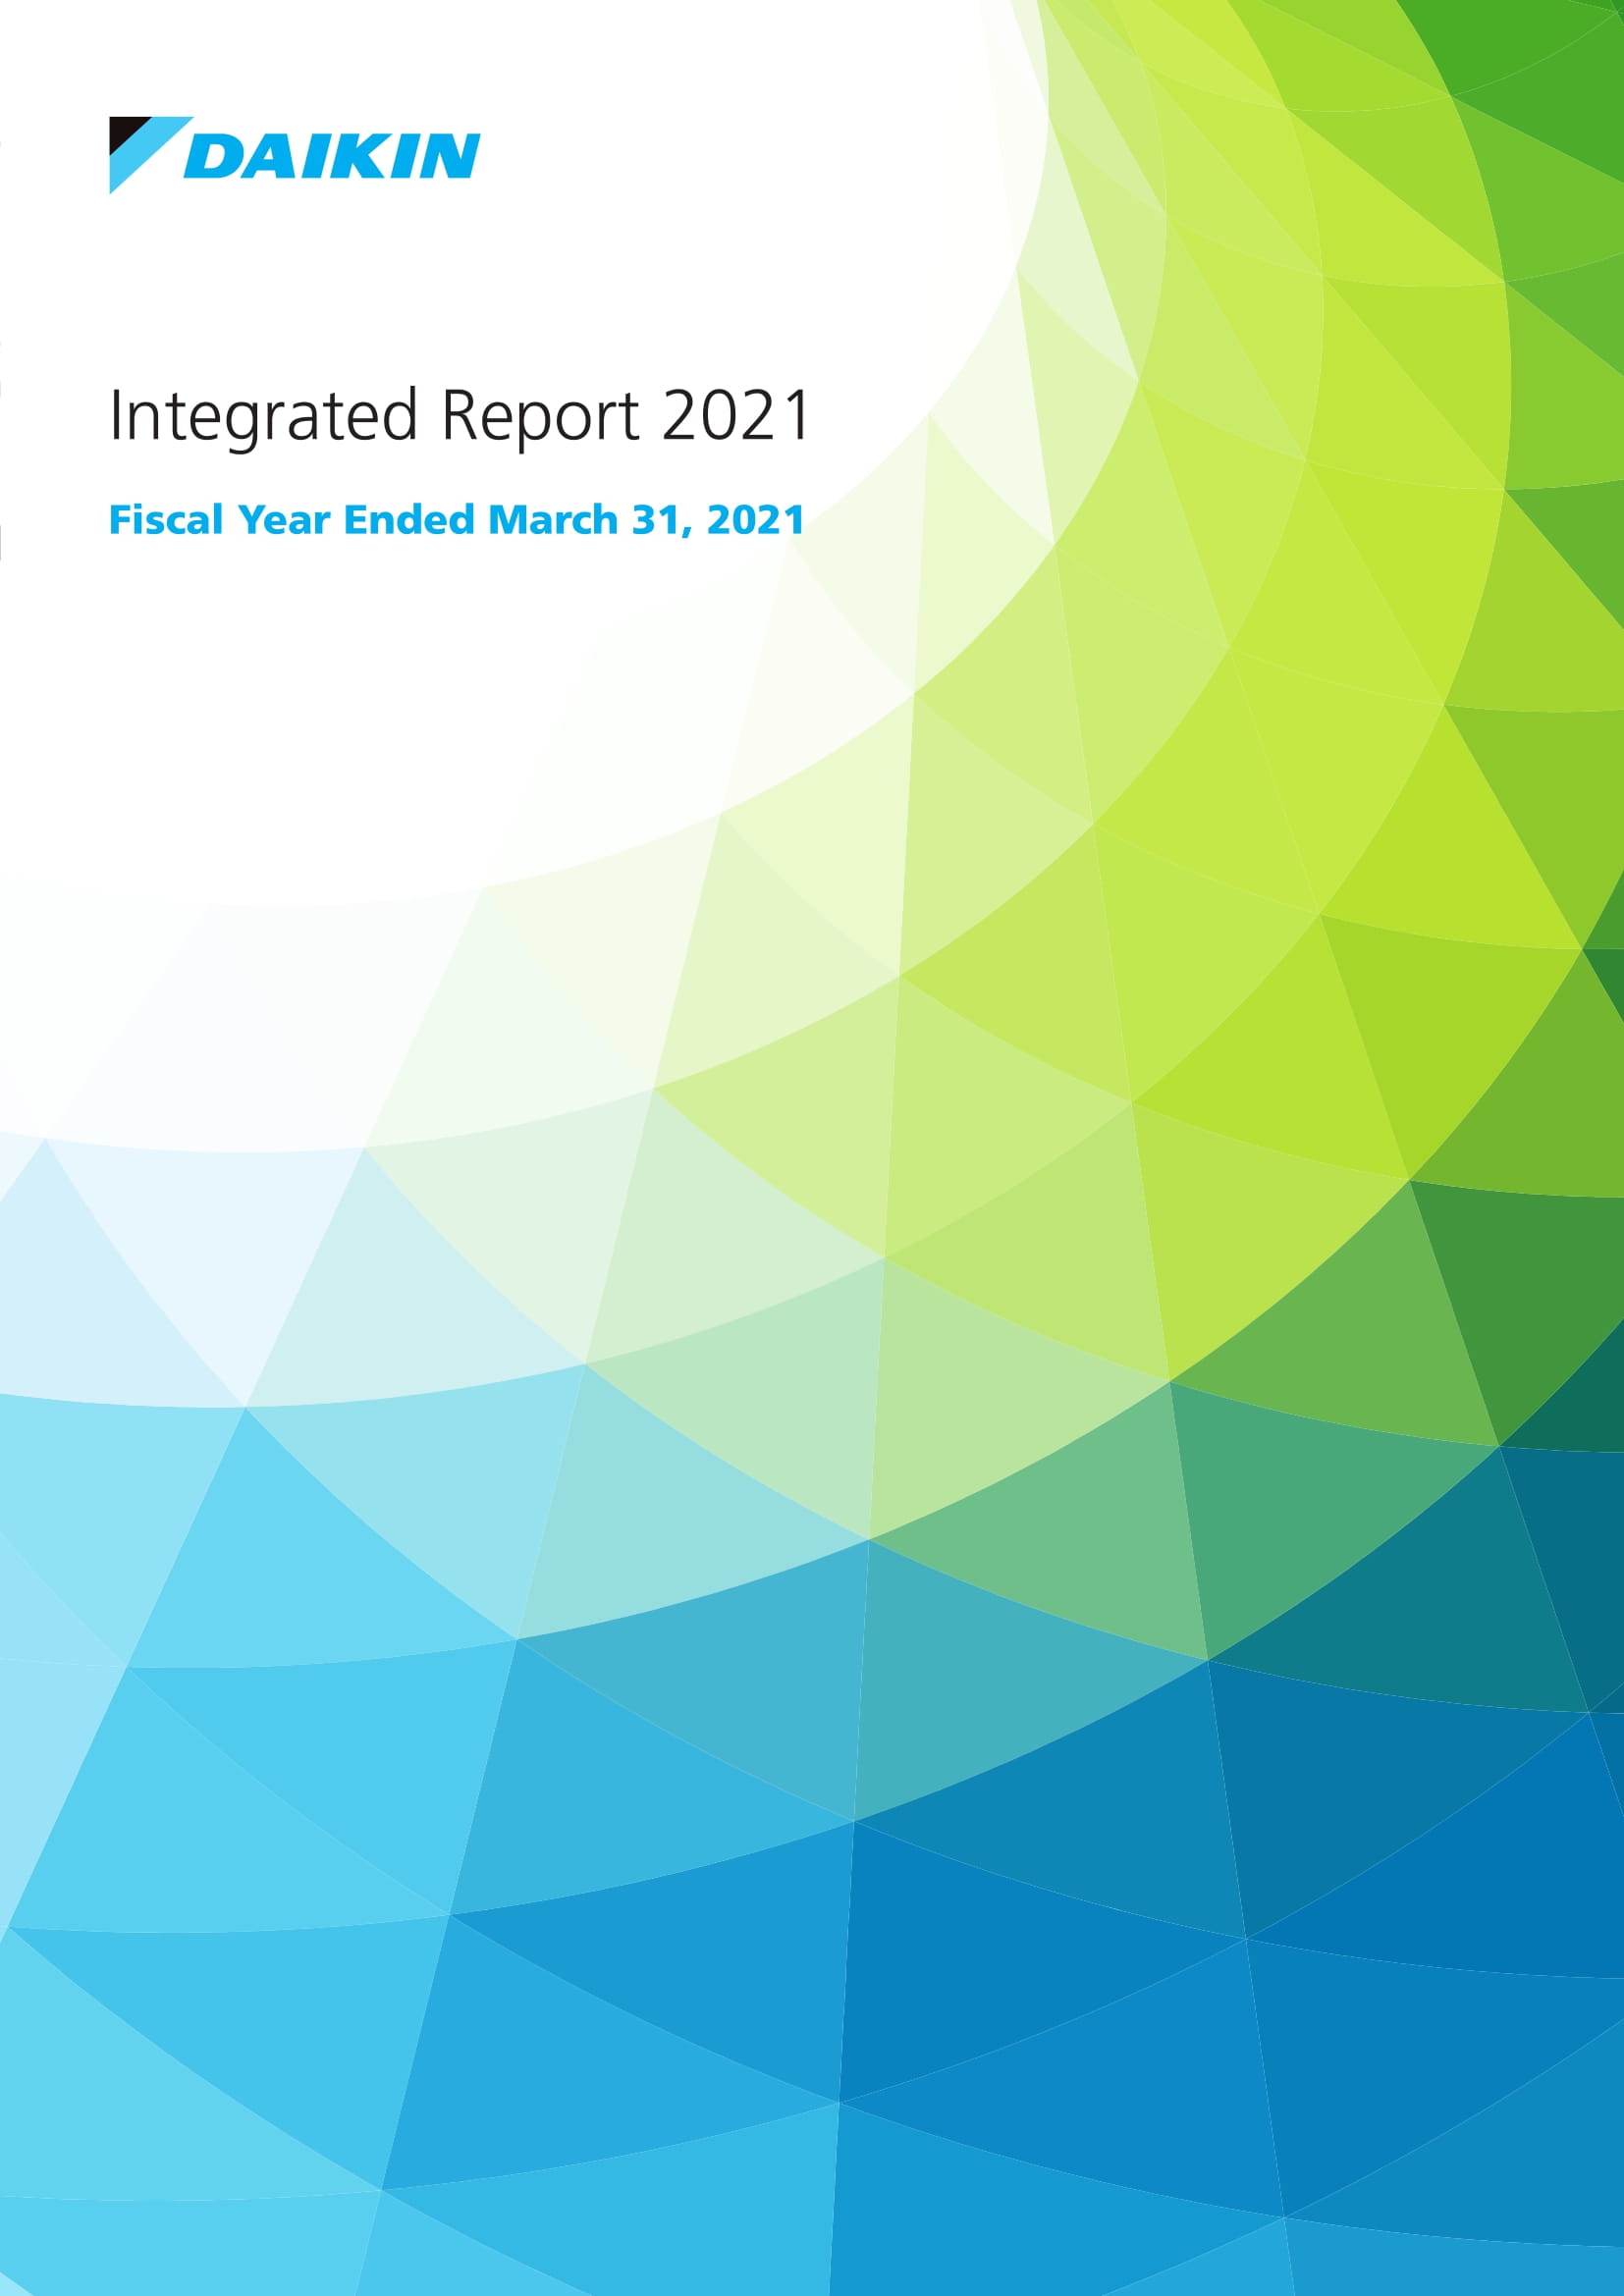 Image:Integrated Report 2021